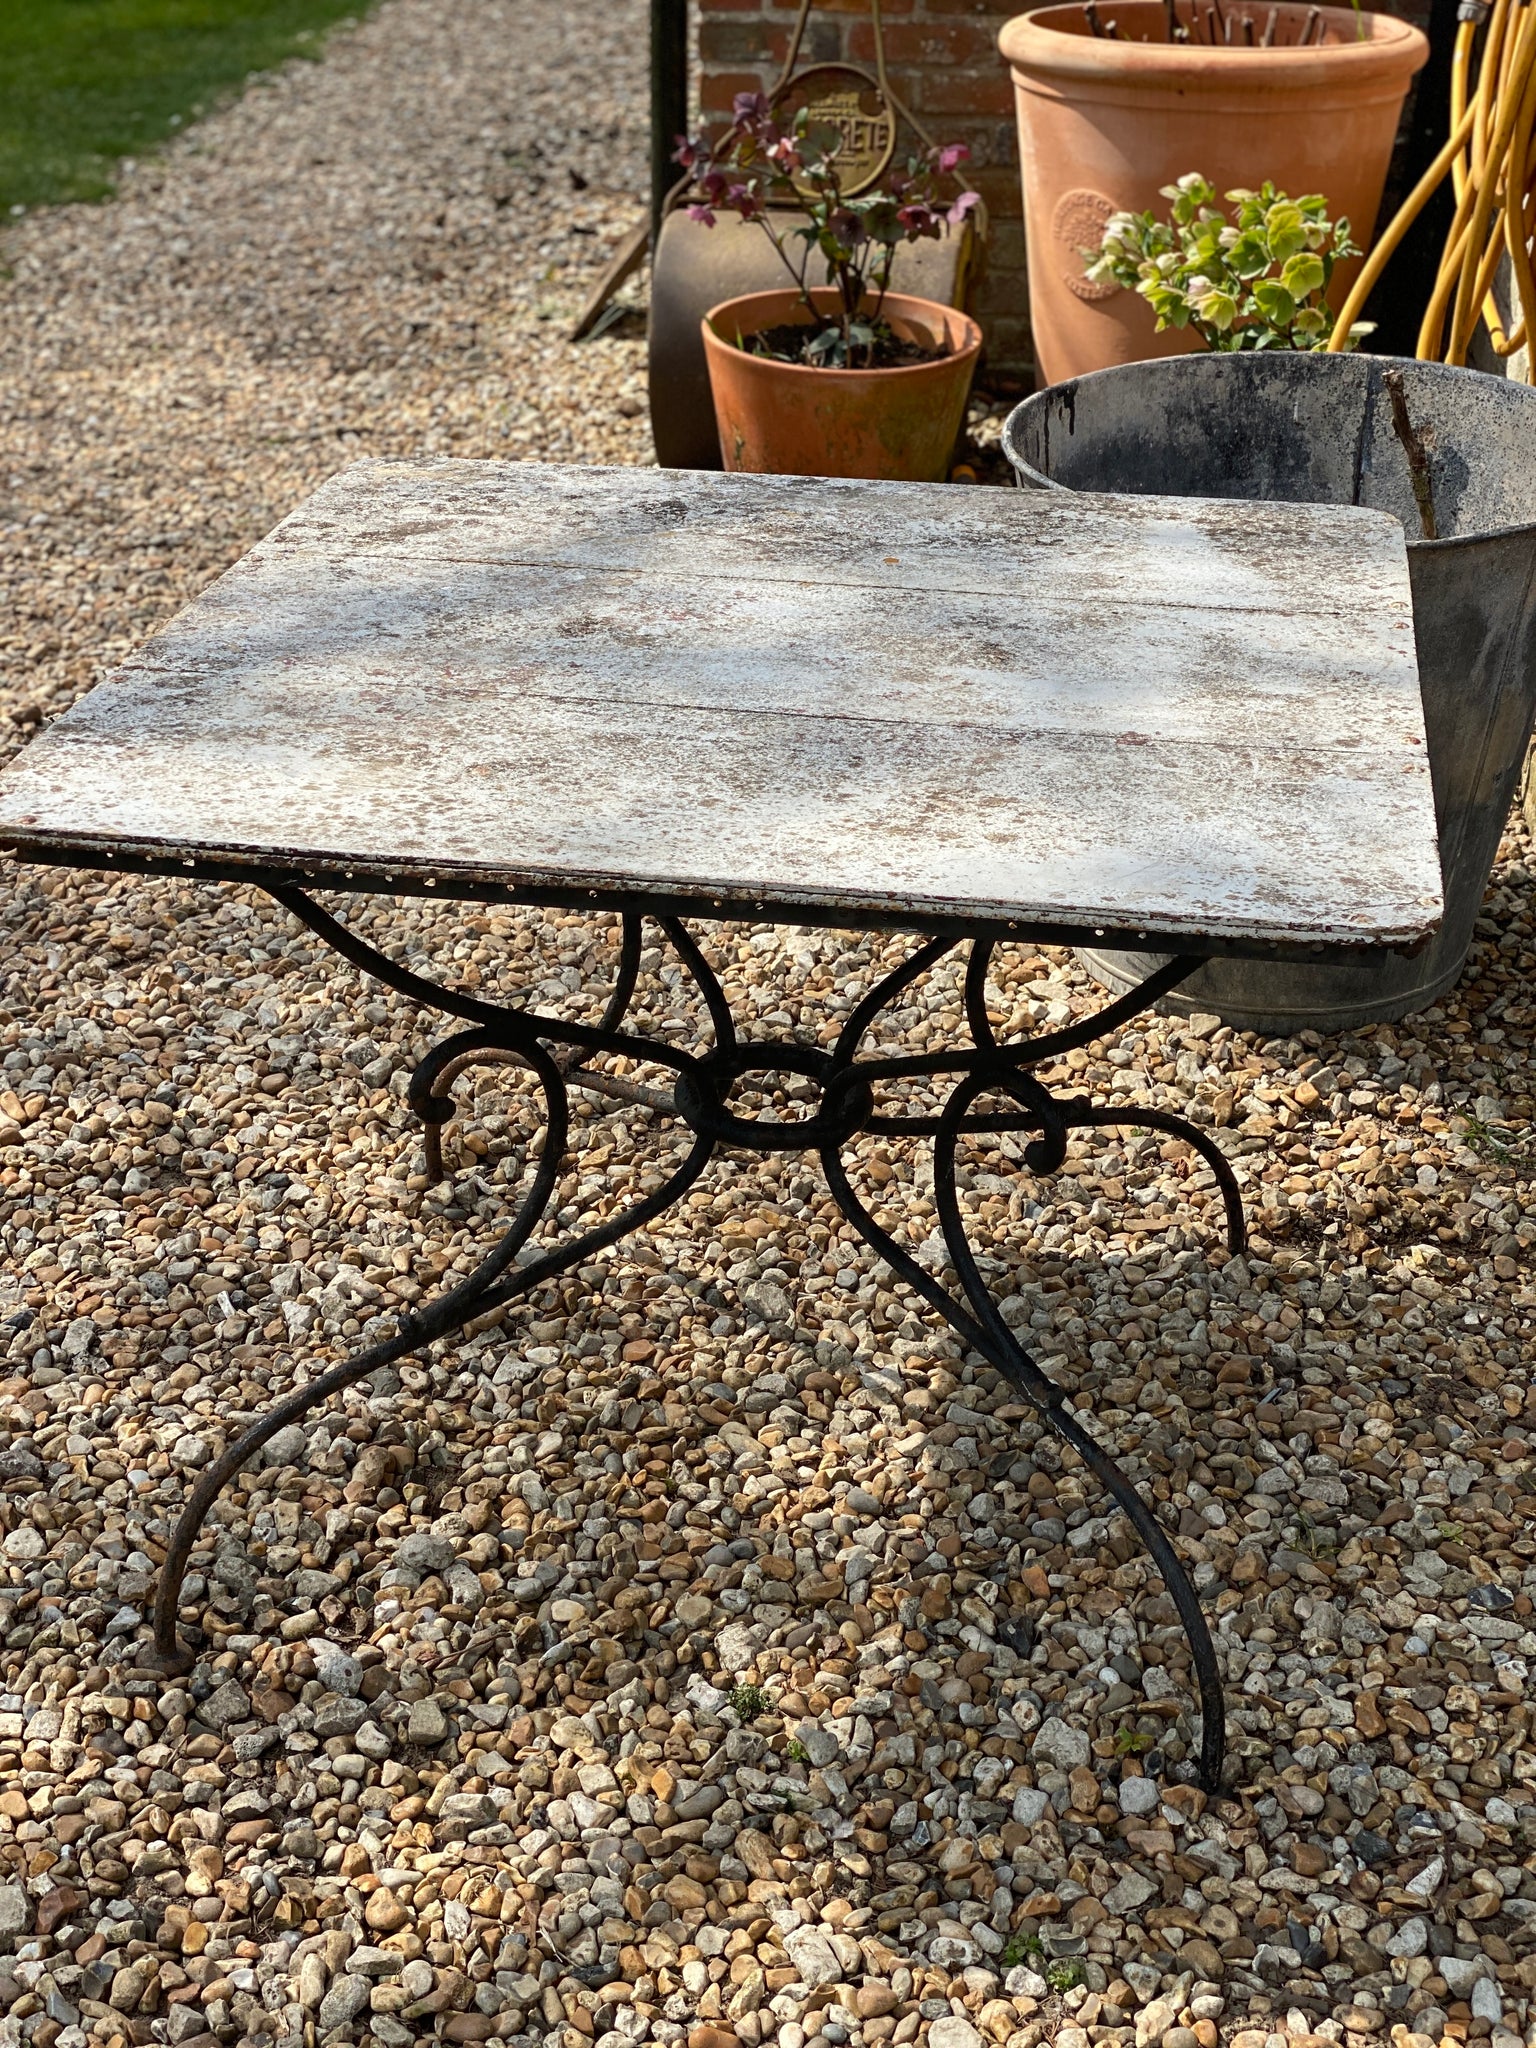 Very old vintage French garden table